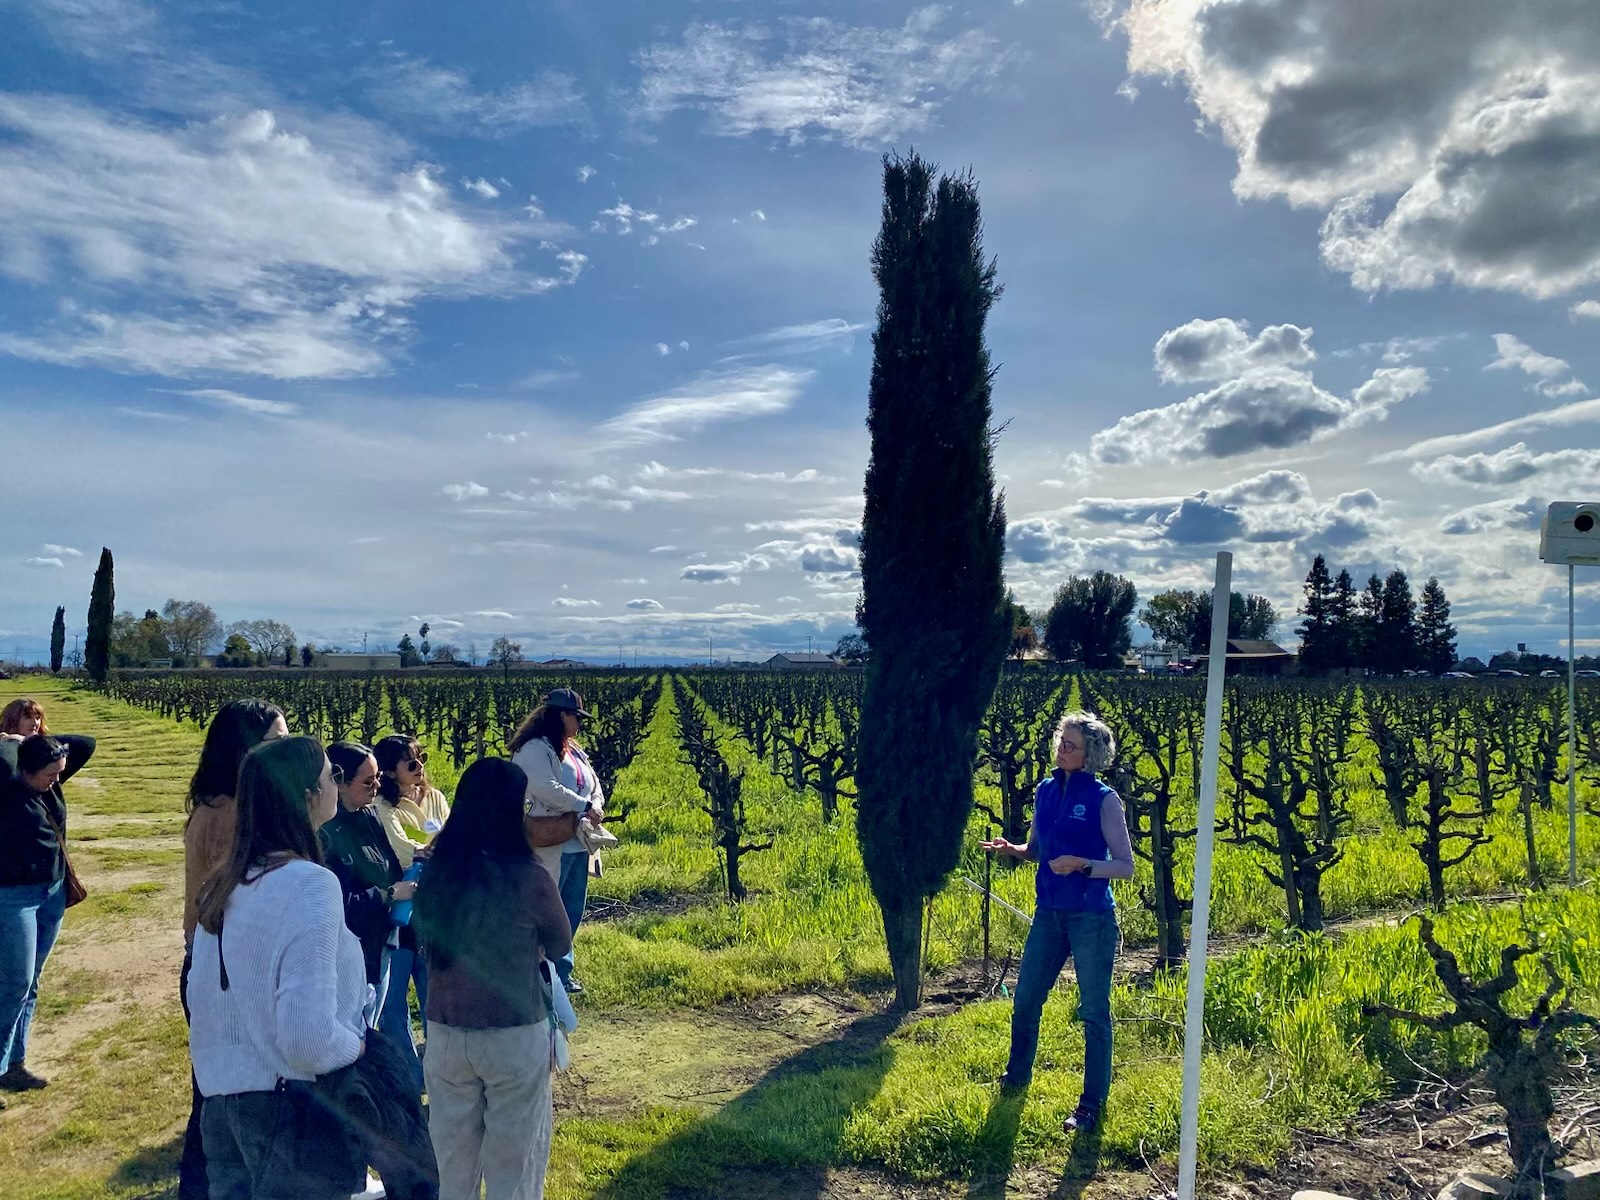 Heather Pyle Lucas, the owner and winemaker of Lucas Winters explains vineyard operations to the Women in Wine group. (Women in Wine / UC Davis)